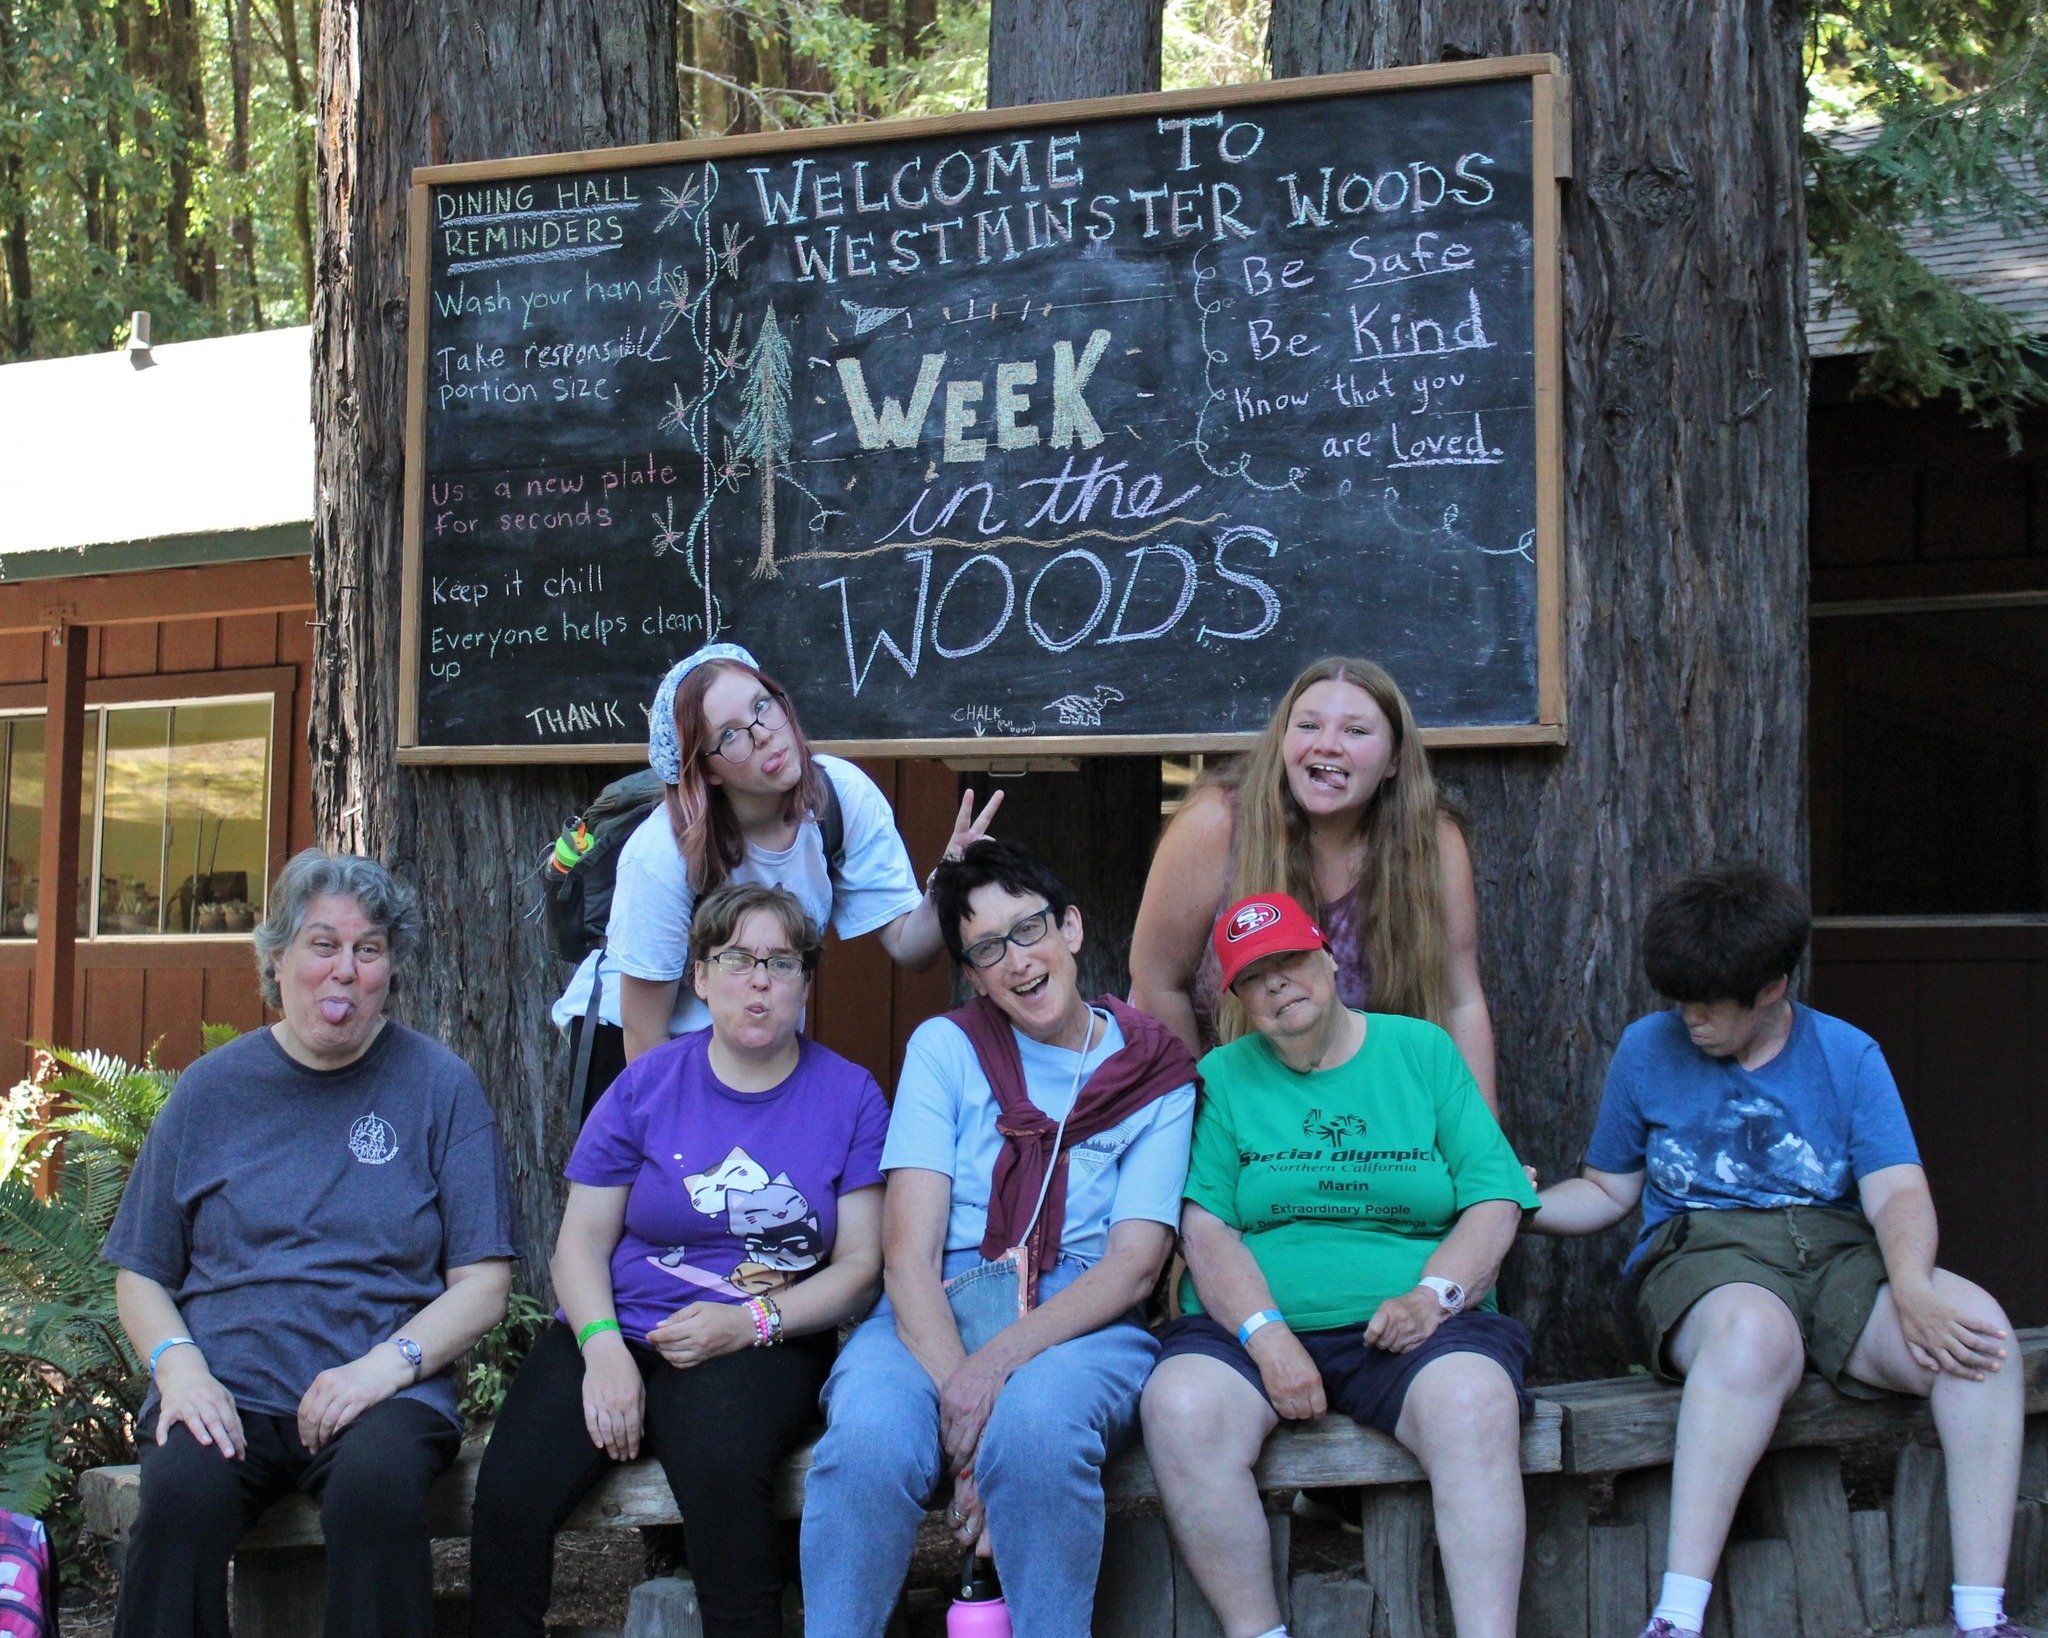 Want to spend a week working at Westminster Woods without committing to a whole summer? Come work at Friendship Camp! Friendship Camp is a week for adults with developmental disabilities to express joy, create friendships, embrace nature, and worship